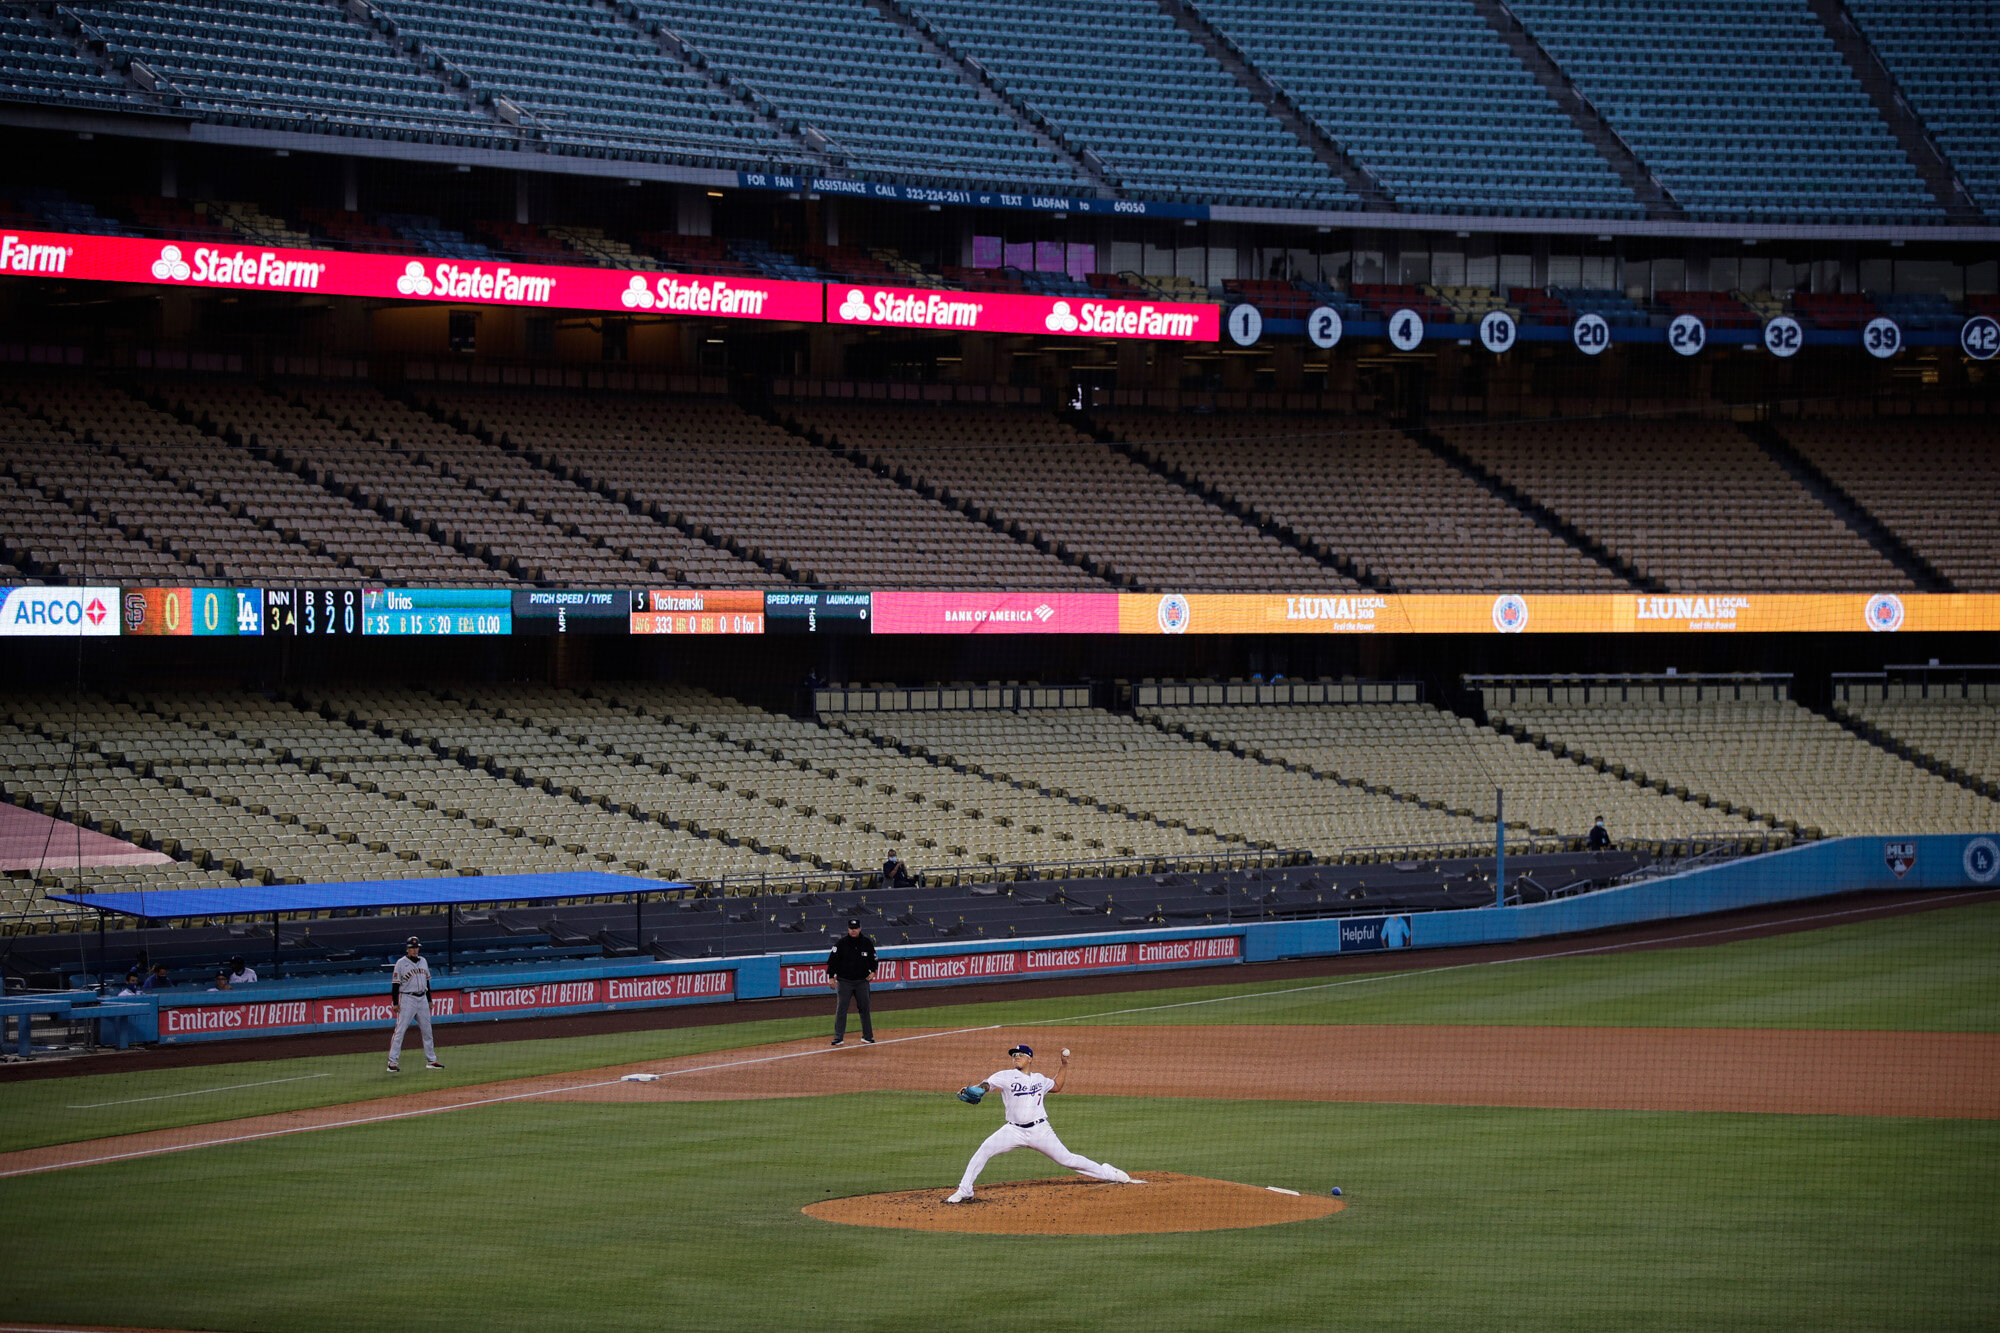  With the seats at Dodger Stadium empty, Los Angeles Dodgers starting pitcher Julio Urias throws to a San Francisco Giants batter during the third inning of a baseball game on July 26, 2020, in Los Angeles. (AP Photo/Jae C. Hong) 